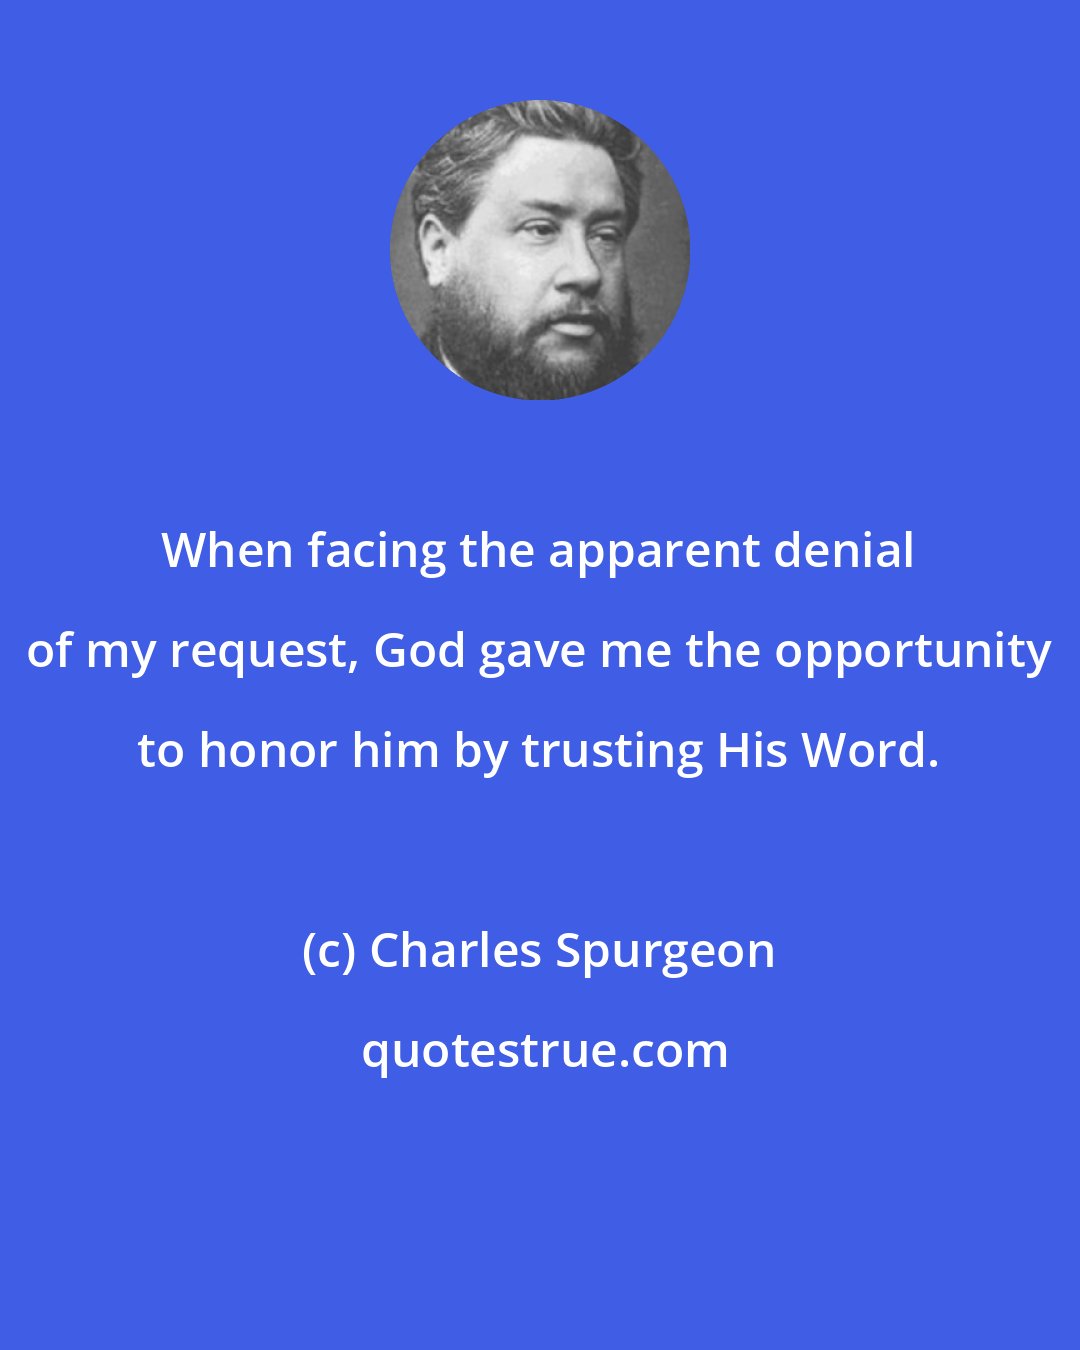 Charles Spurgeon: When facing the apparent denial of my request, God gave me the opportunity to honor him by trusting His Word.